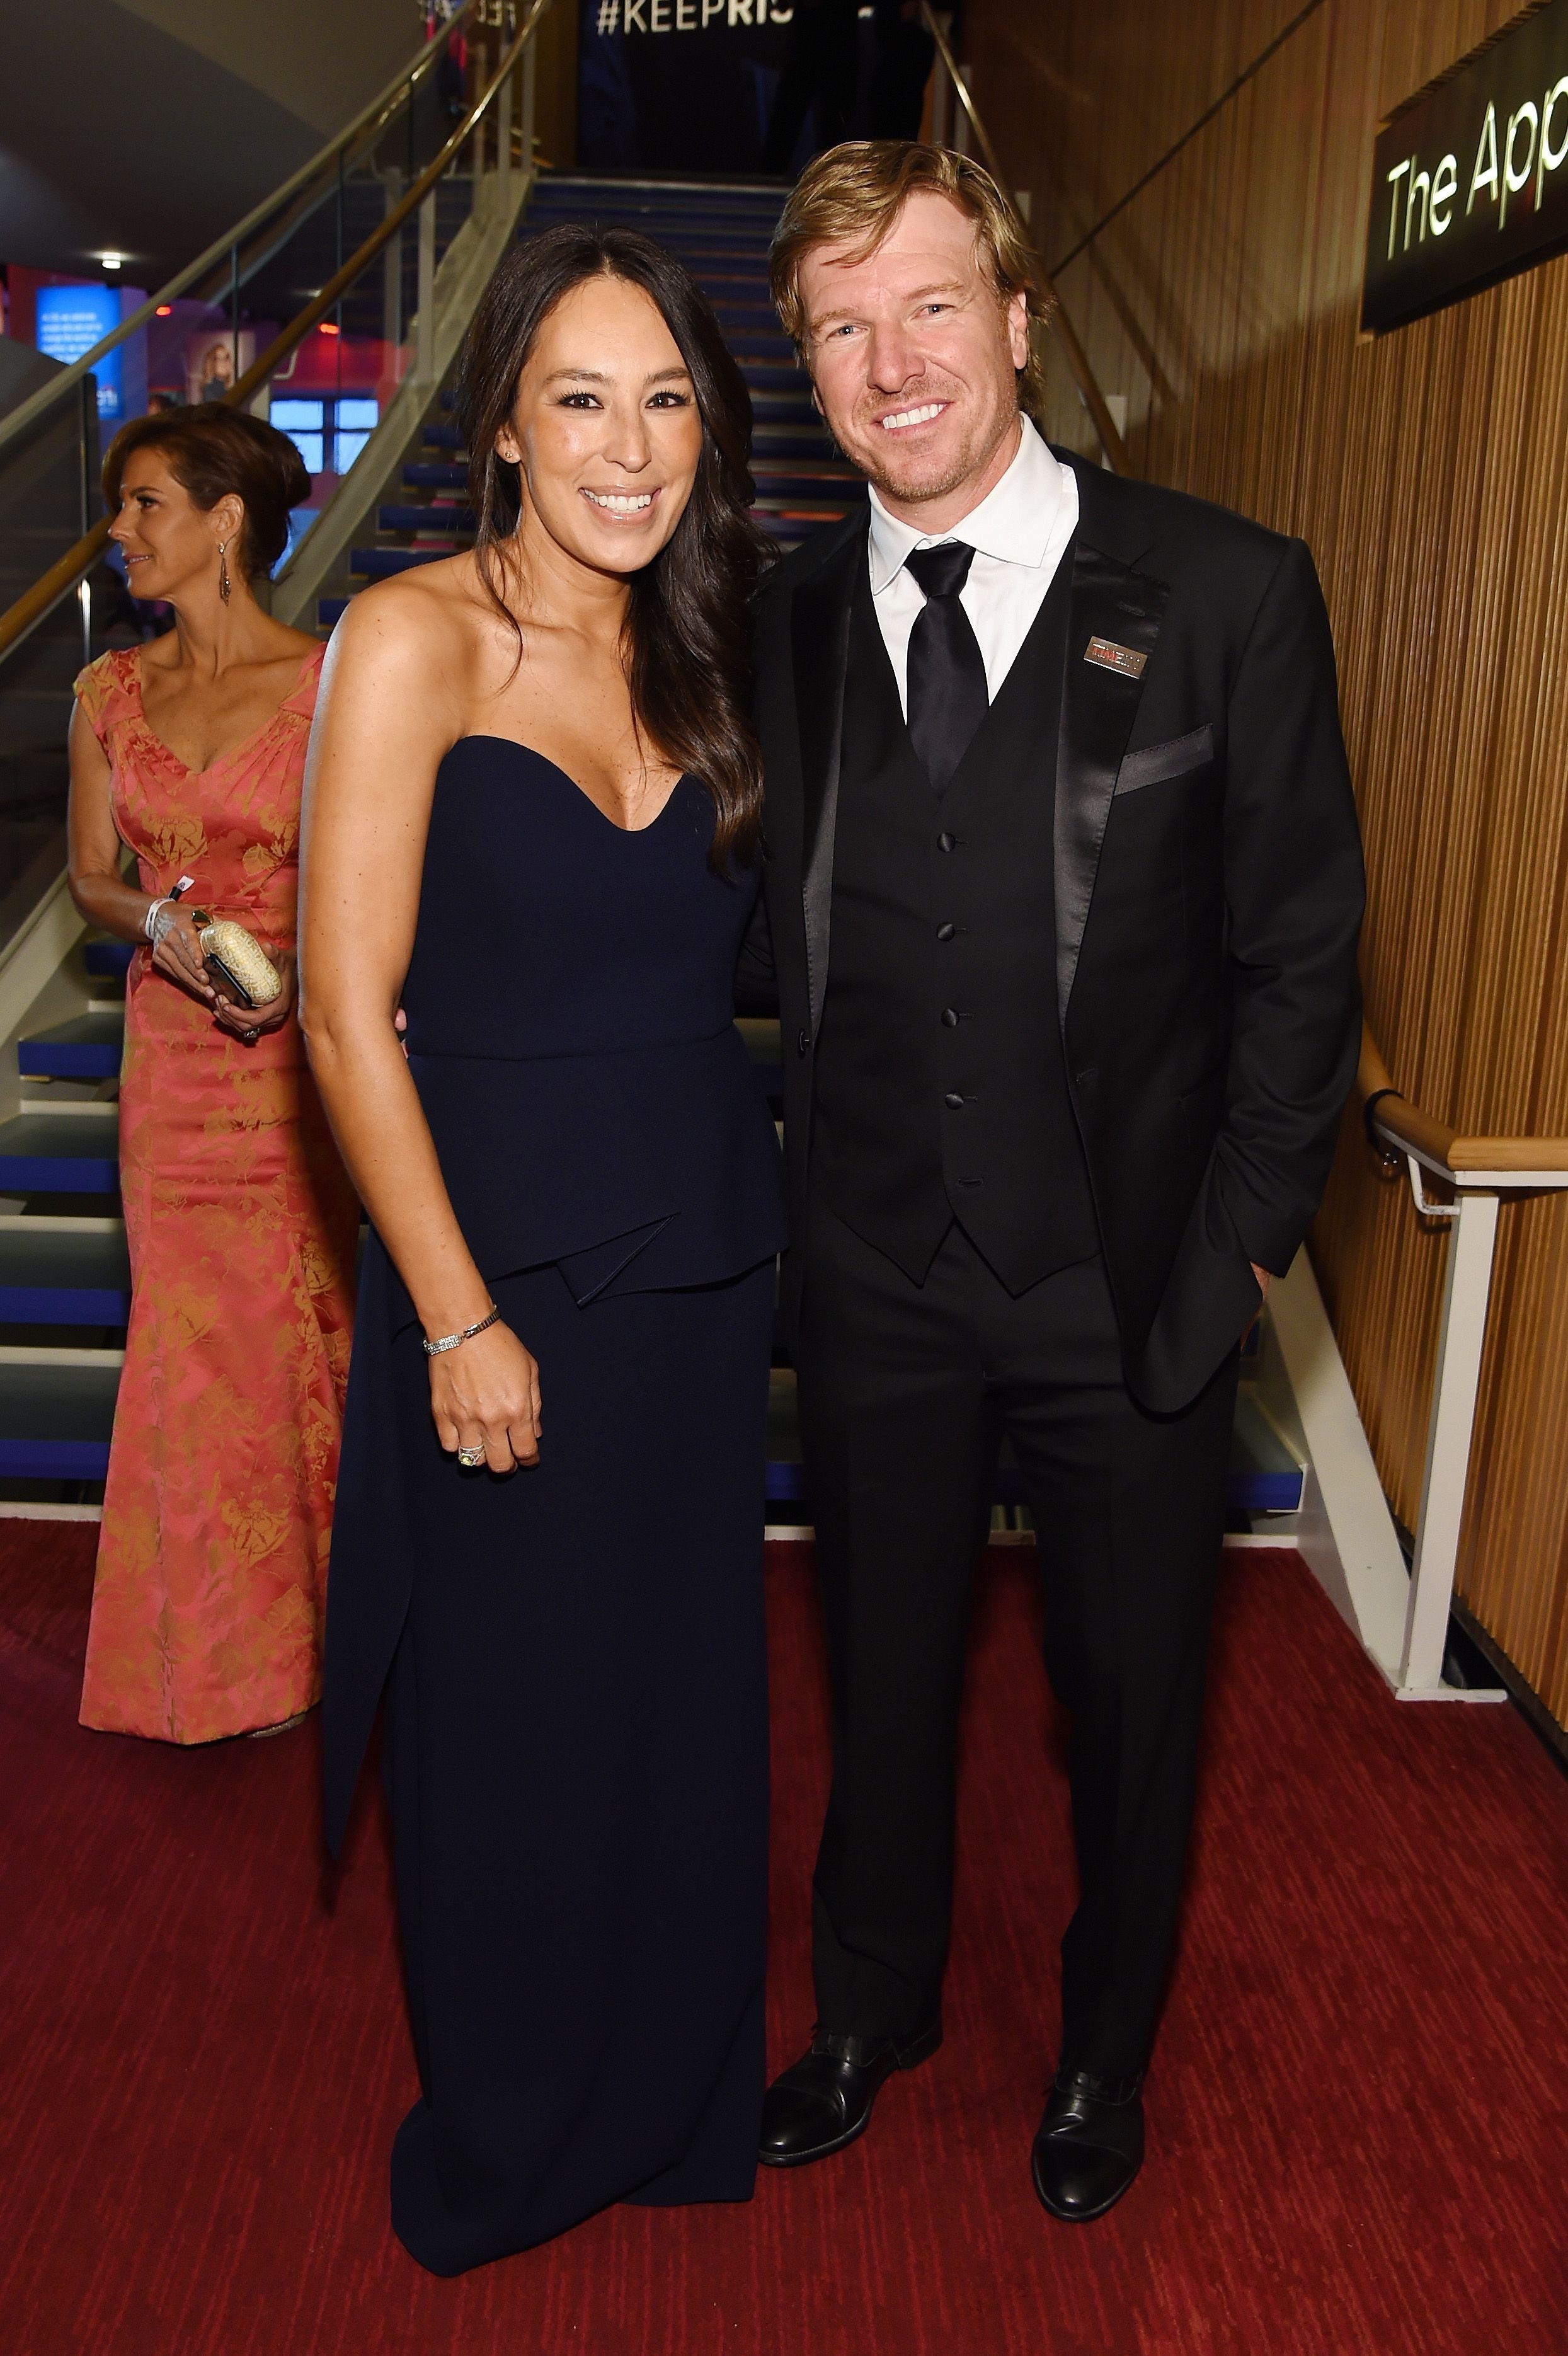 Joanna and Chip Gaines at the TIME 100 Gala Cocktails at Jazz at Lincoln Center on April 23, 2019 in New York City | Photo: Getty Images